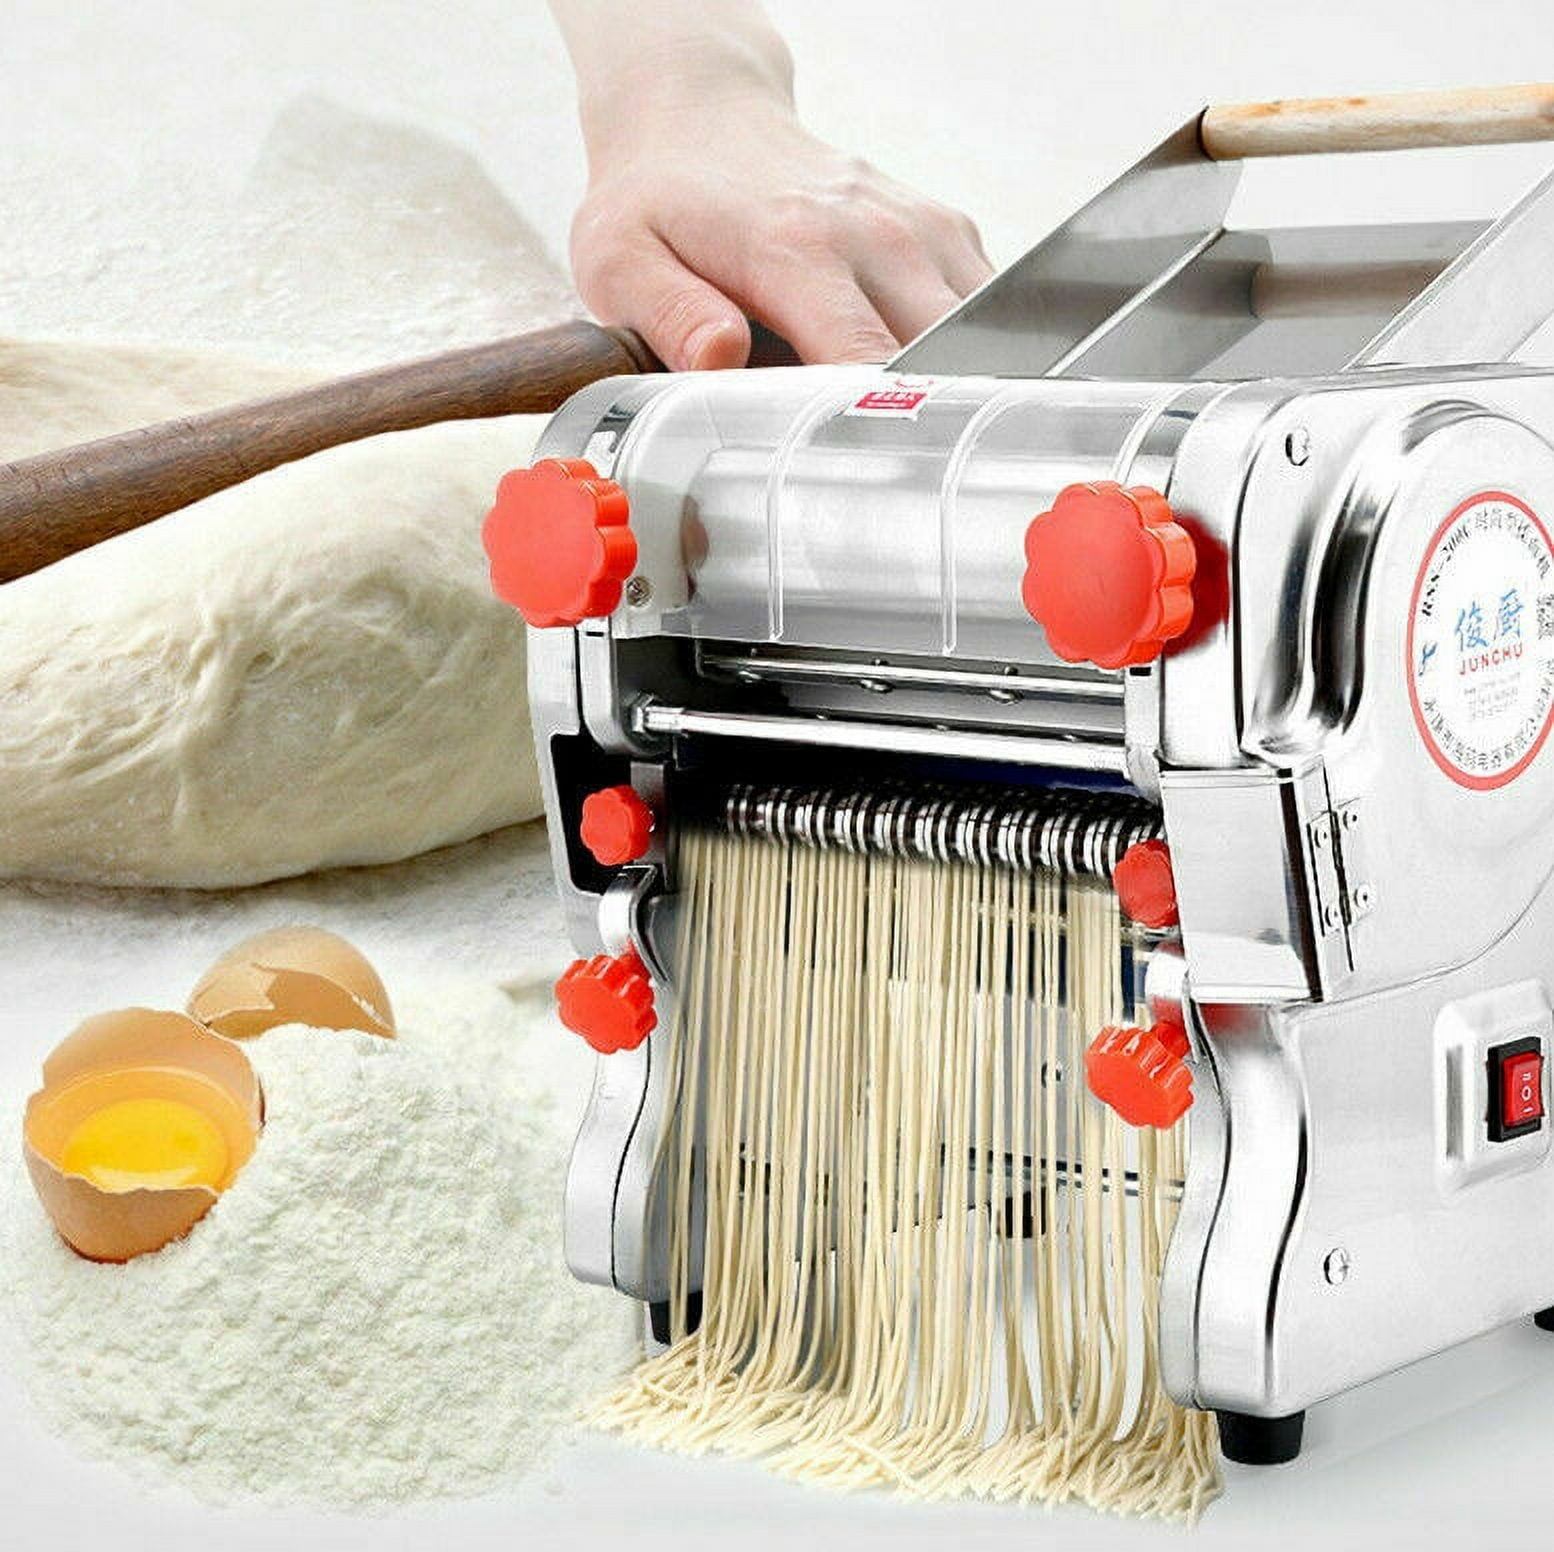  135W Noodle Machine, Automatic Pasta Maker, Spaghetti Maker,  for Dumplings Roller Noodles Hanger, 6 Speed, Adjustable Thickness, CE  Certified (Silver Single blade) : Home & Kitchen